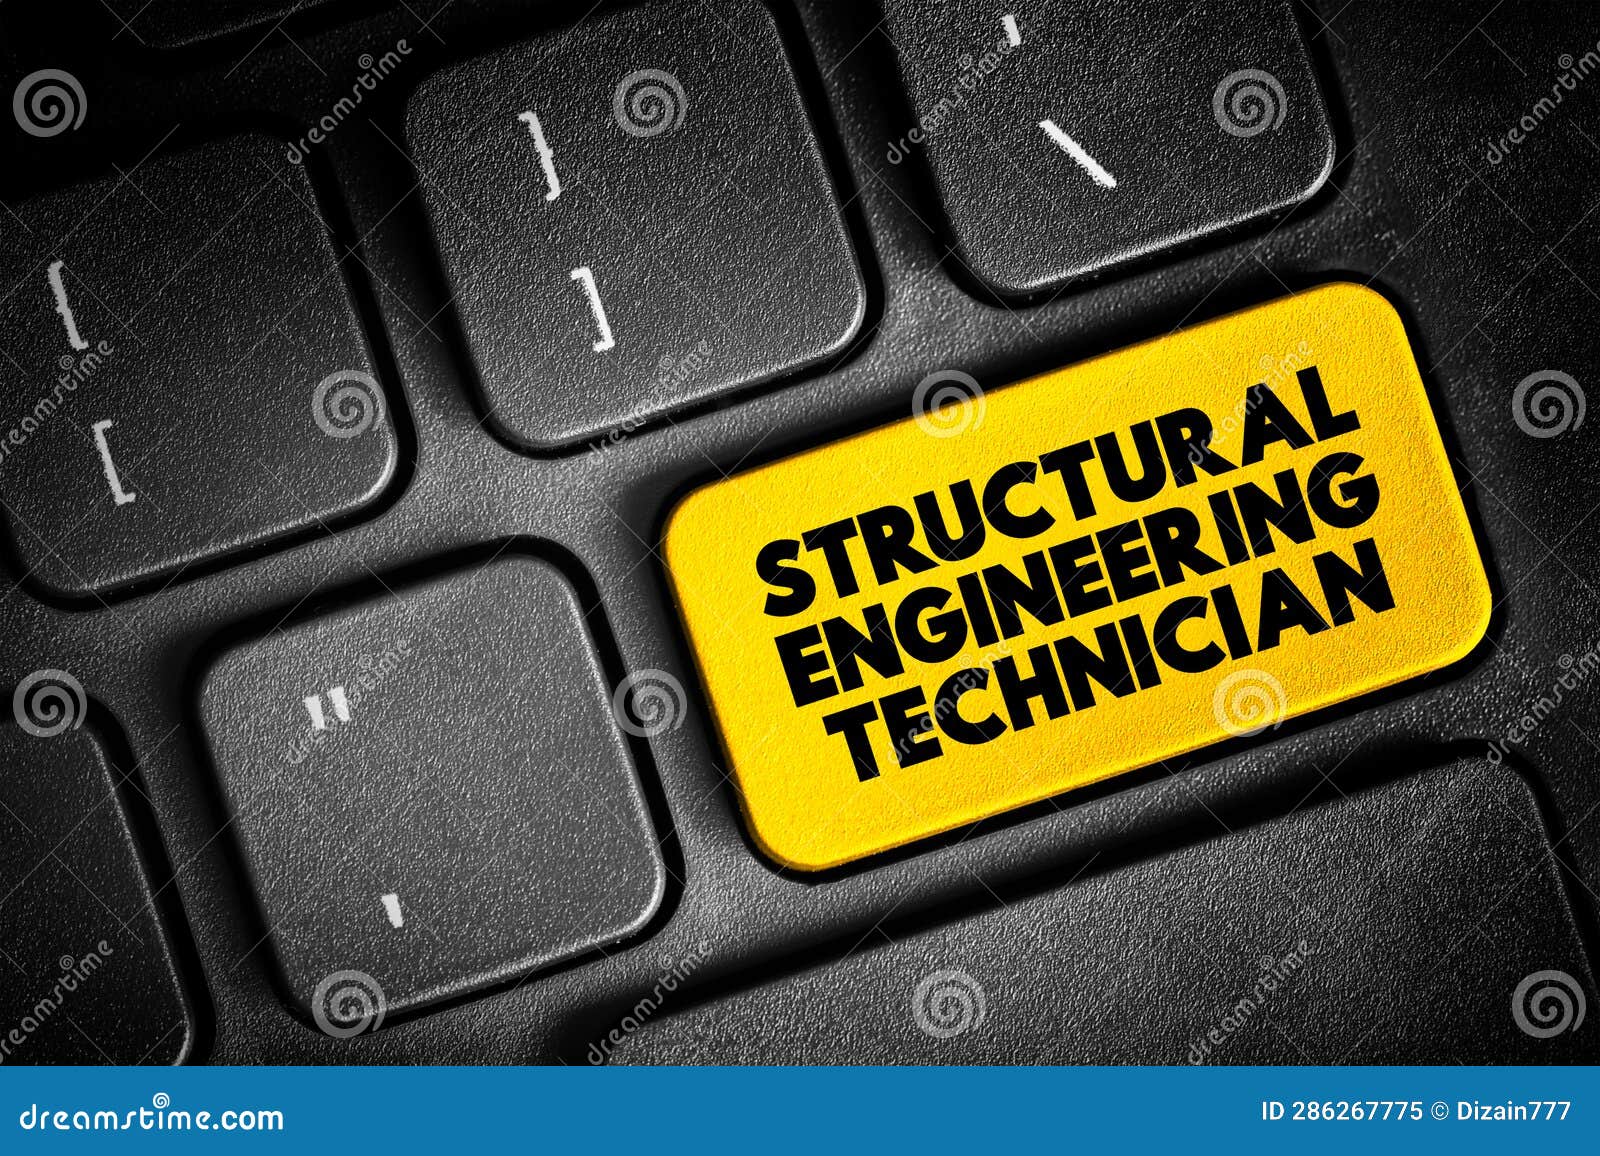 Structural Engineering Technician Perform Technical Tasks in Structural ...